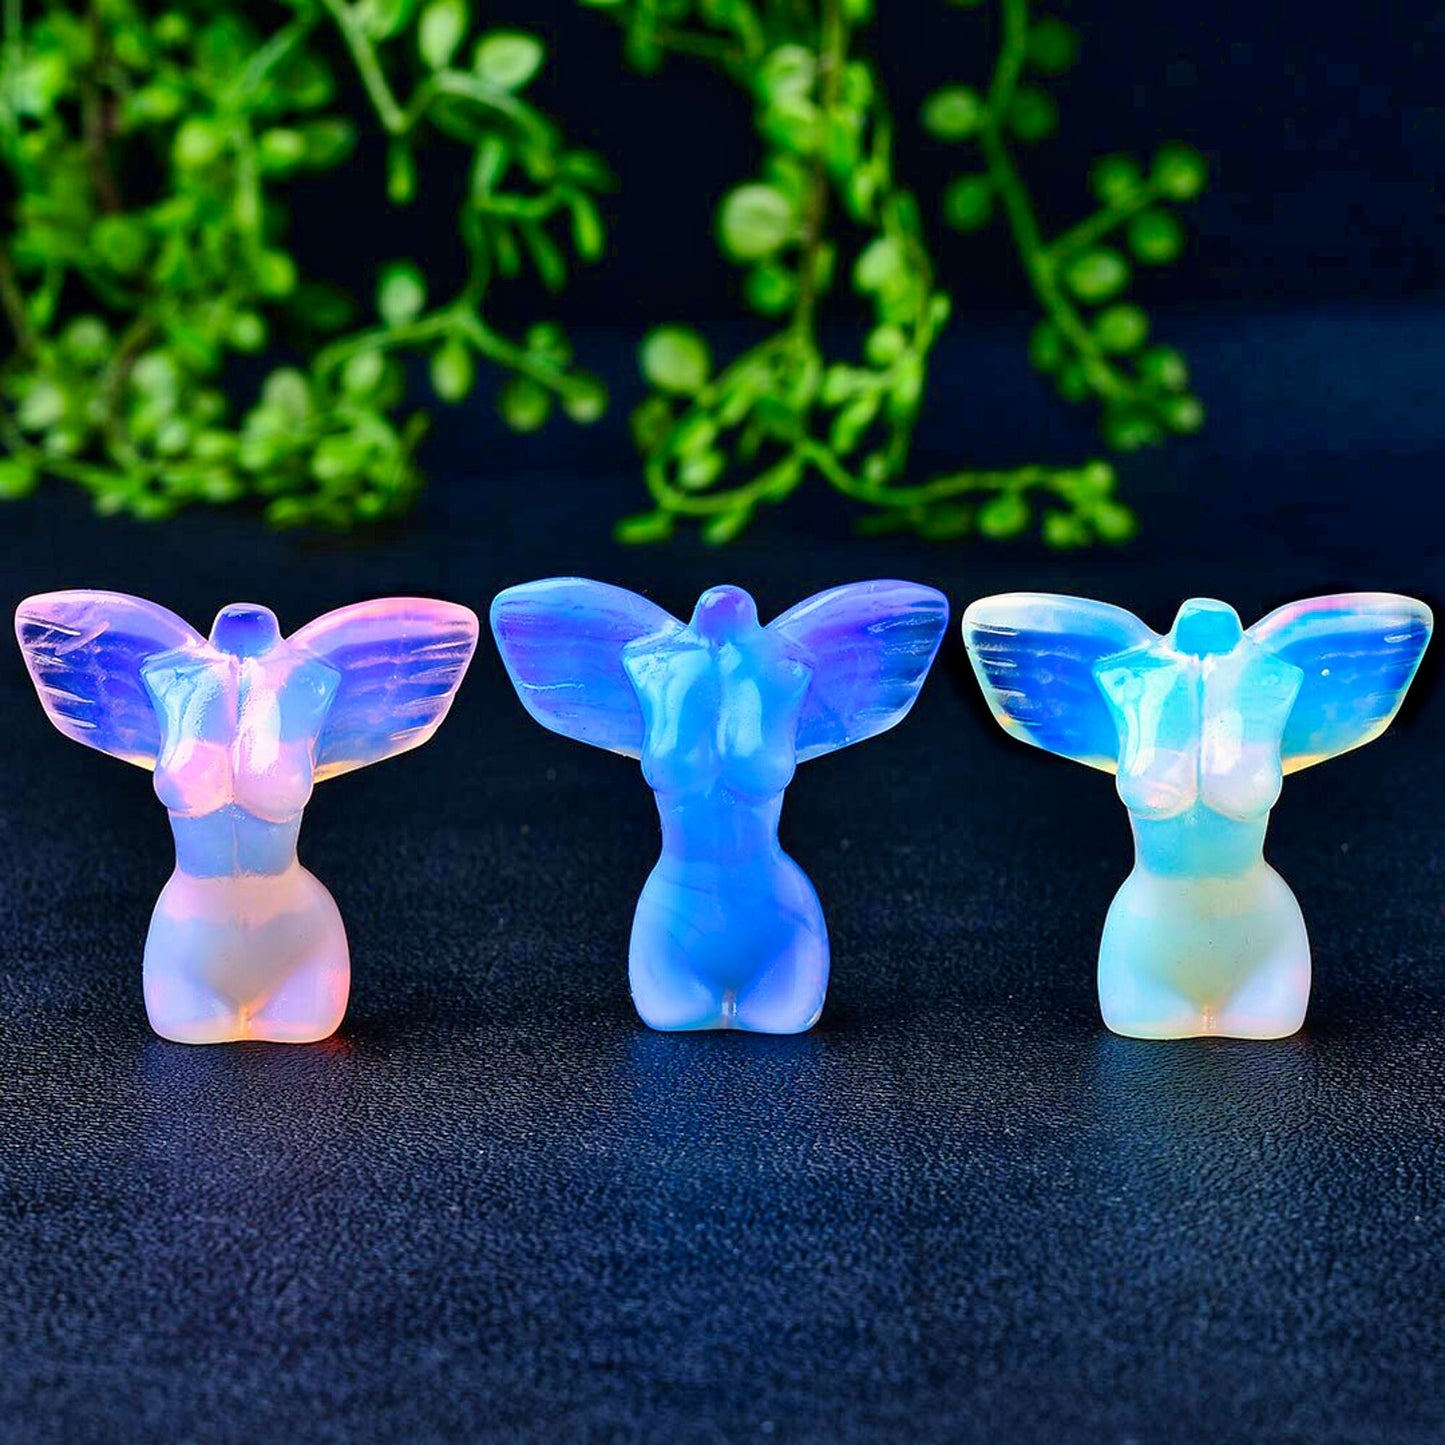 Natural Crystal Wing Model Statue Handmade Opal Female Body Carved Crafts Figurine - Home Ornament Gift